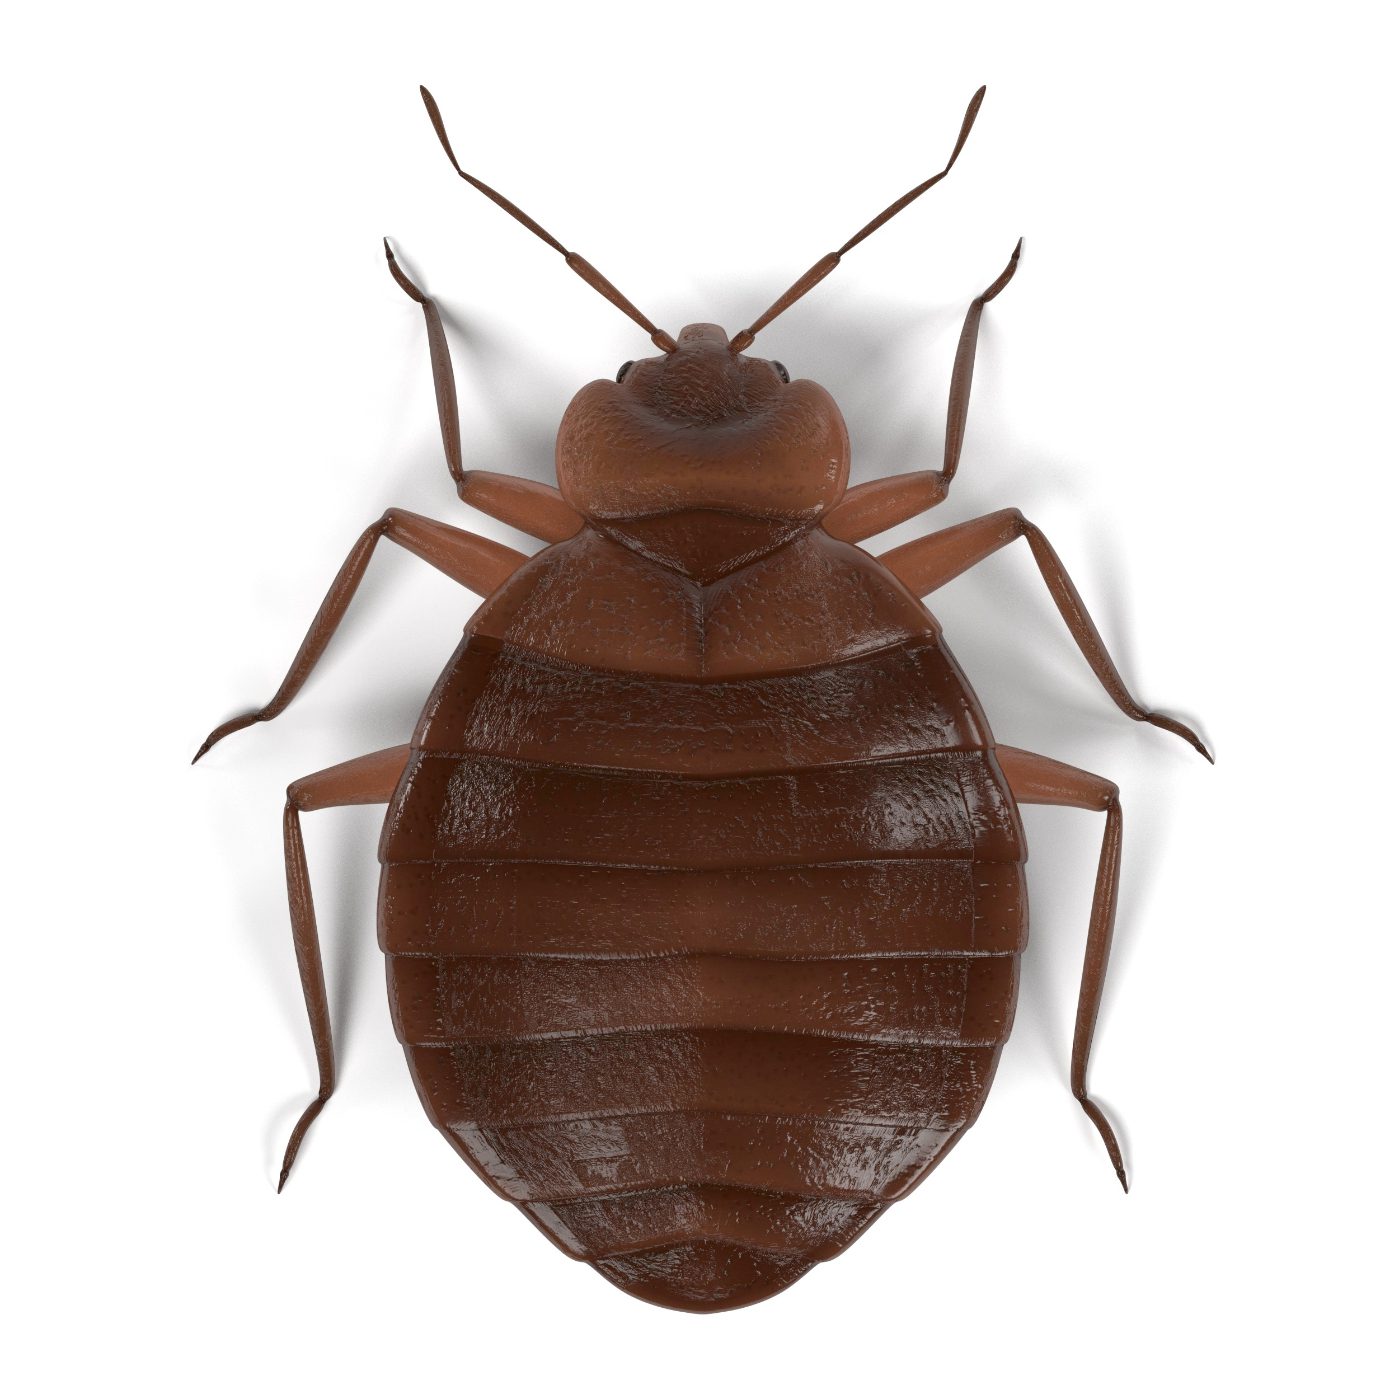 Bed bug picture on a white background